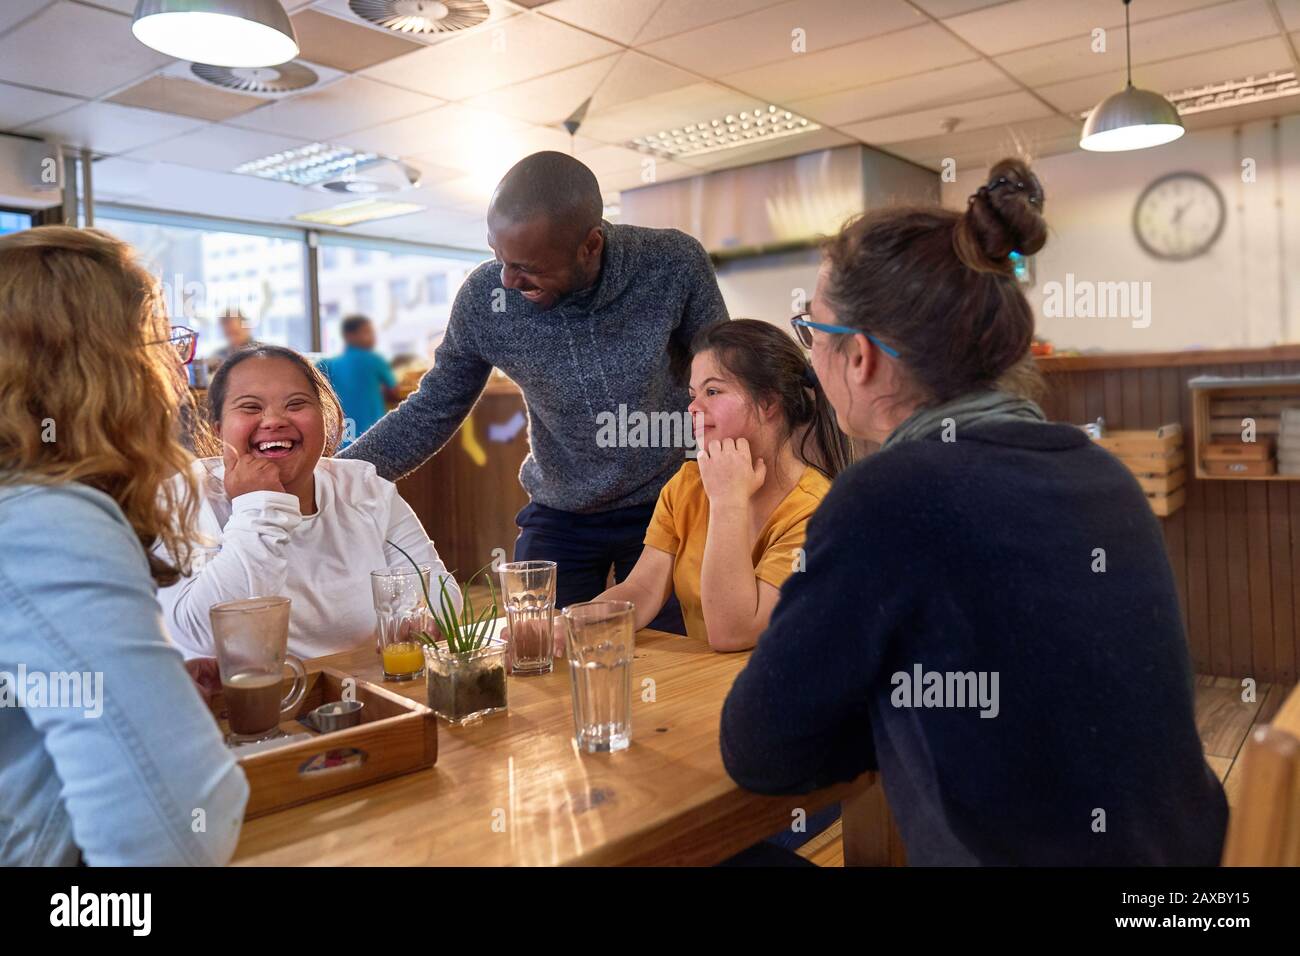 Happy young women with Down Syndrome in cafe with friends Stock Photo